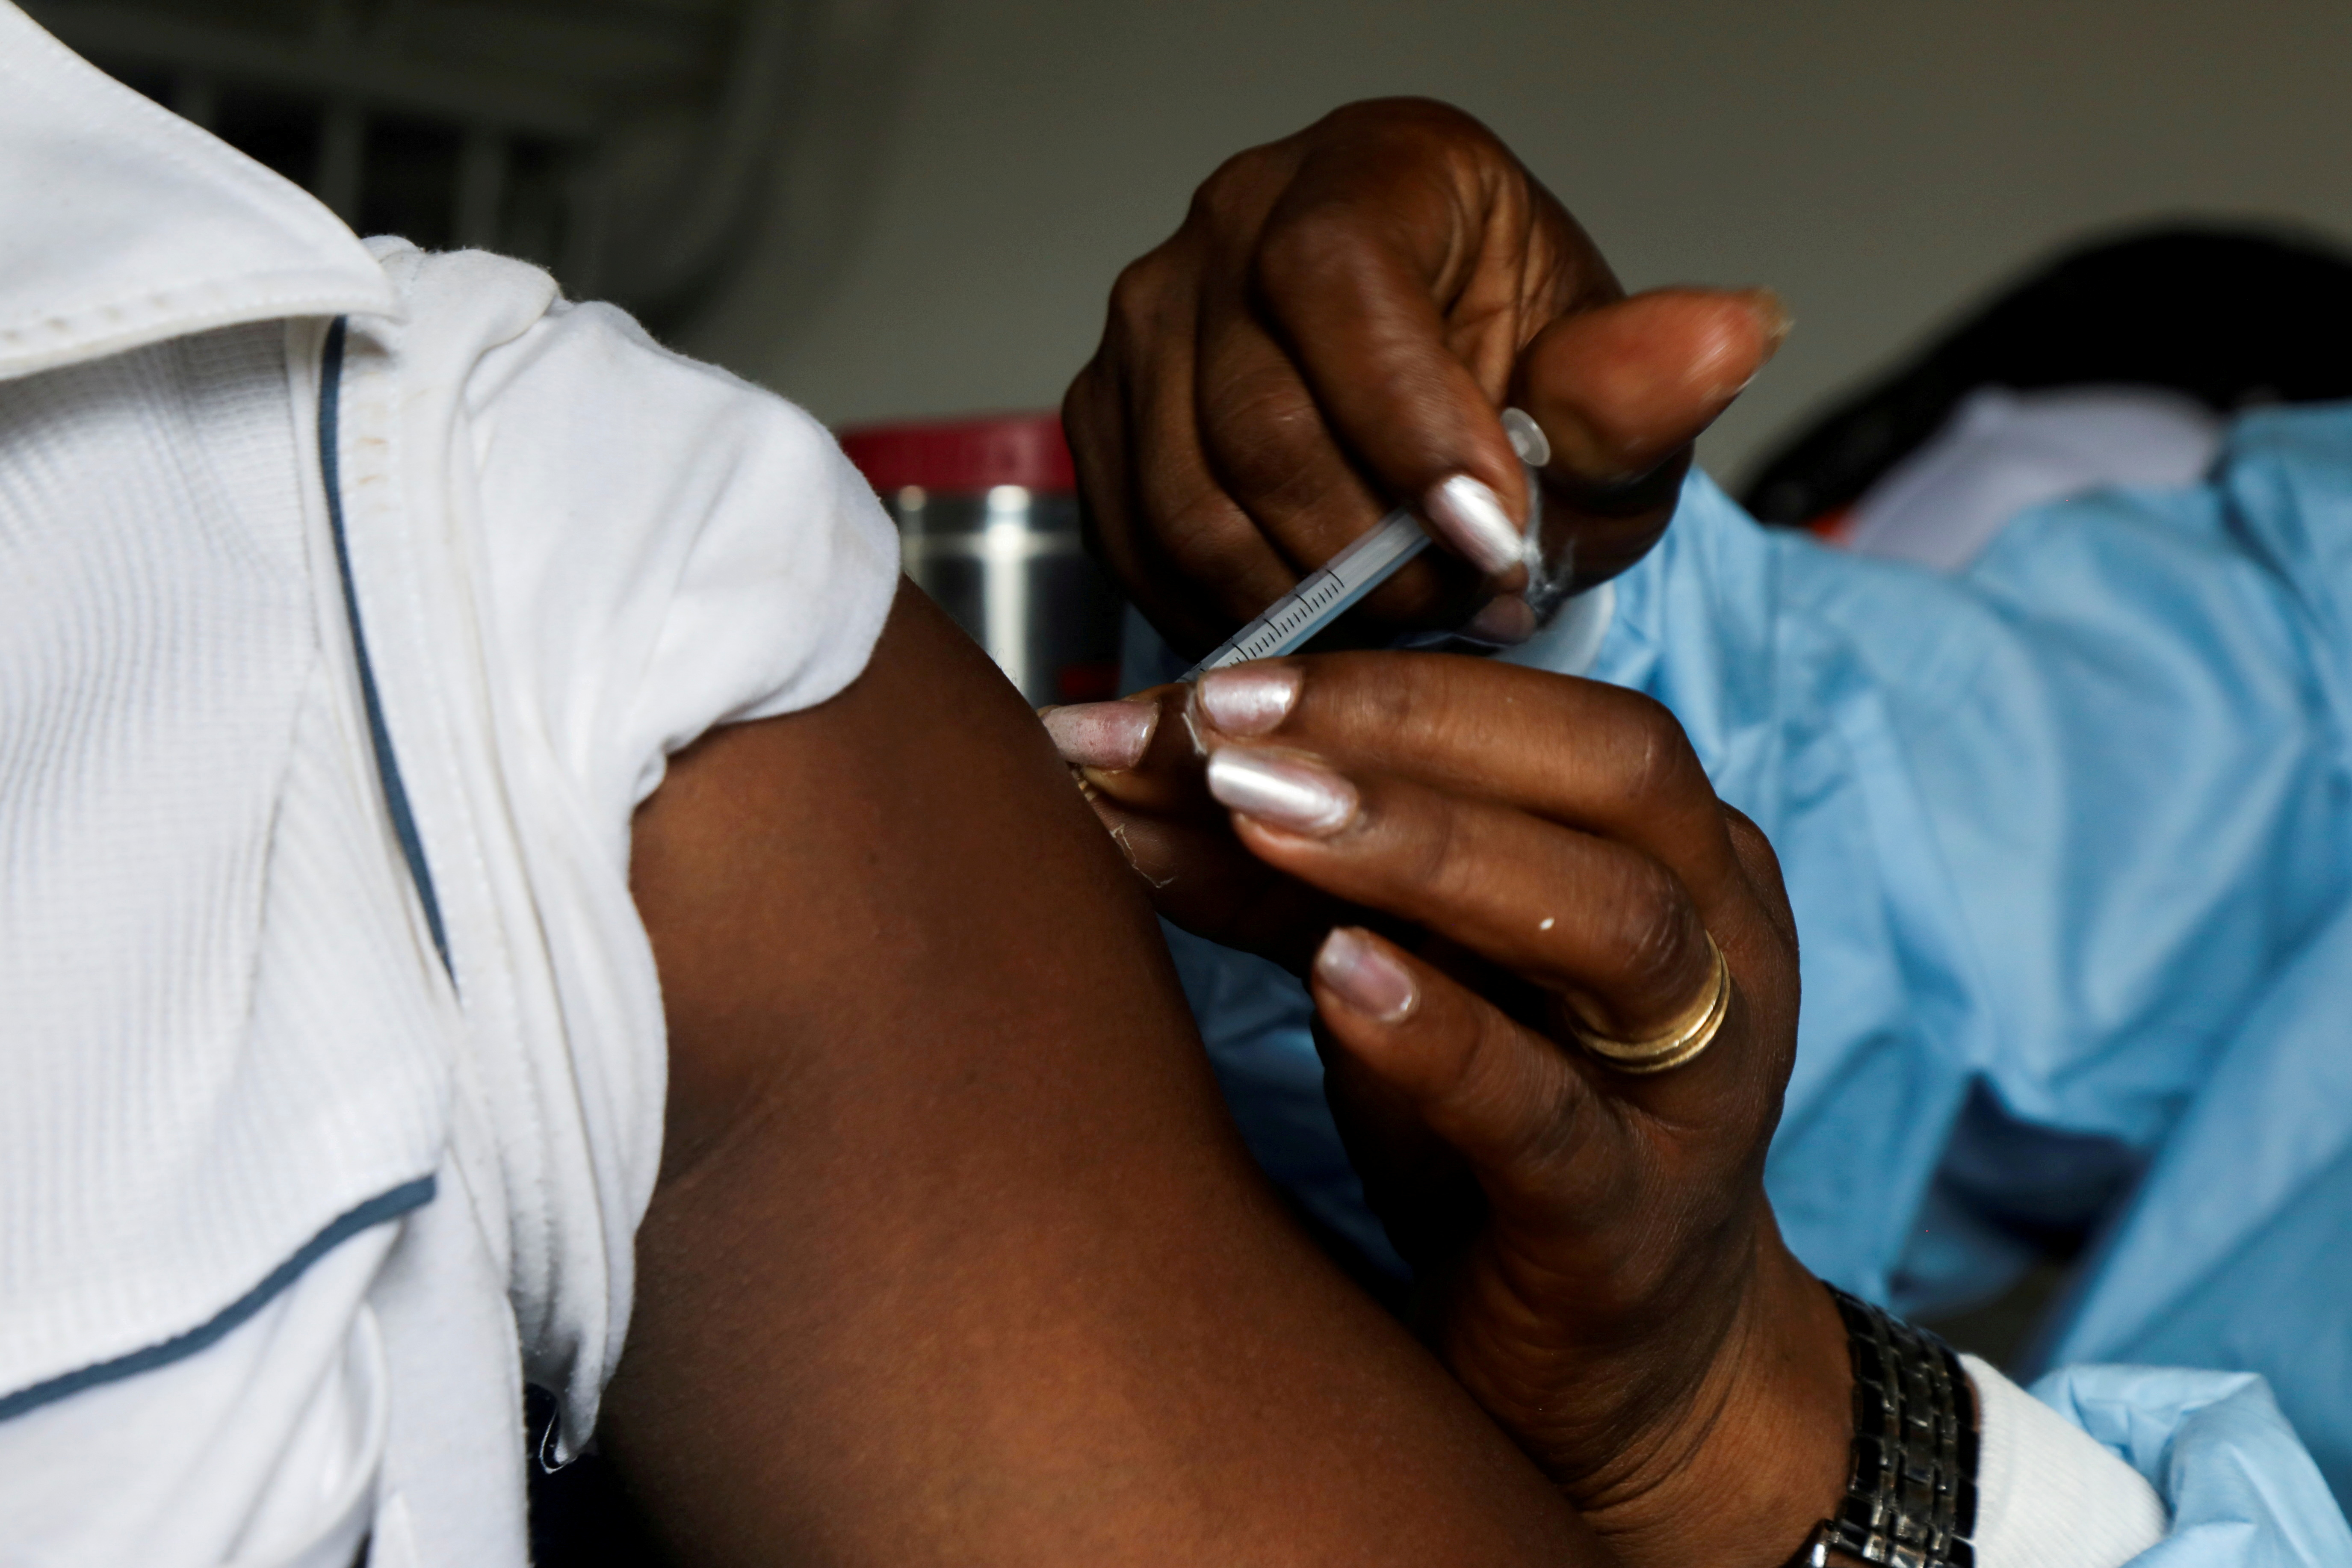 A man receives a vaccine against the coronavirus disease (COVID-19) at a mobile vaccination center in Abidjan, Ivory Coast